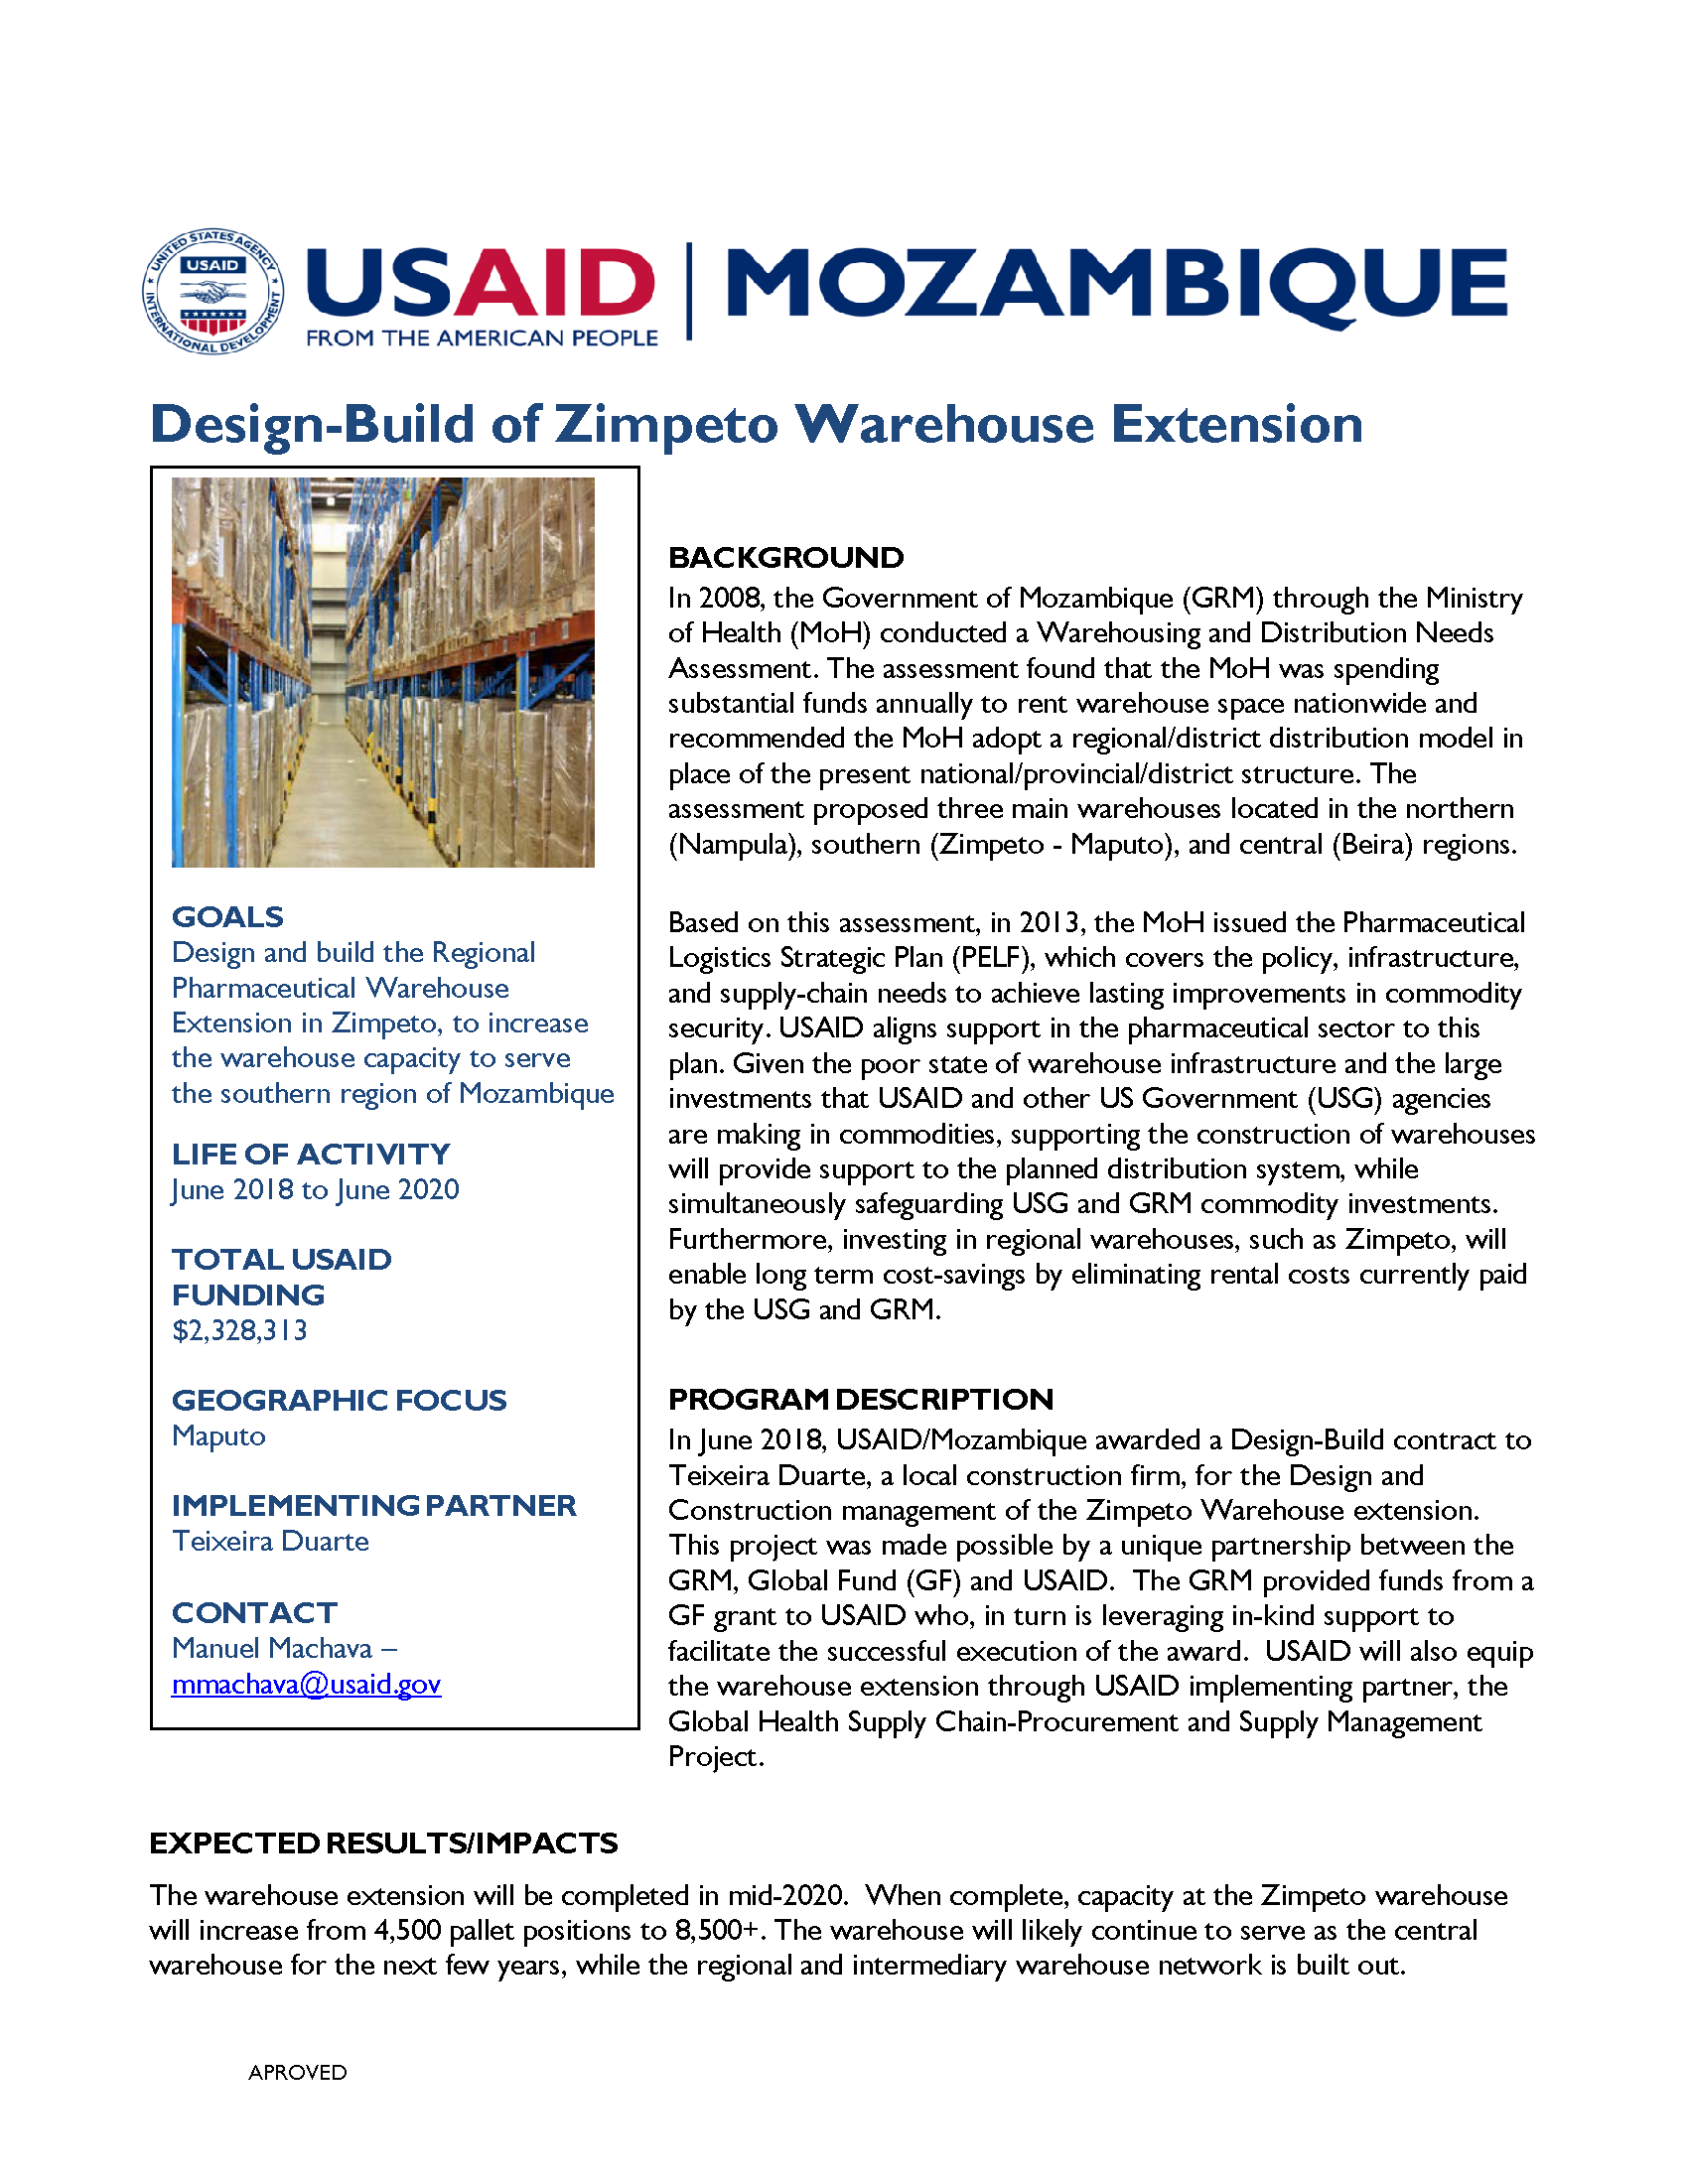 Design-Build of Zimpeto Warehouse Extension Fact Sheet